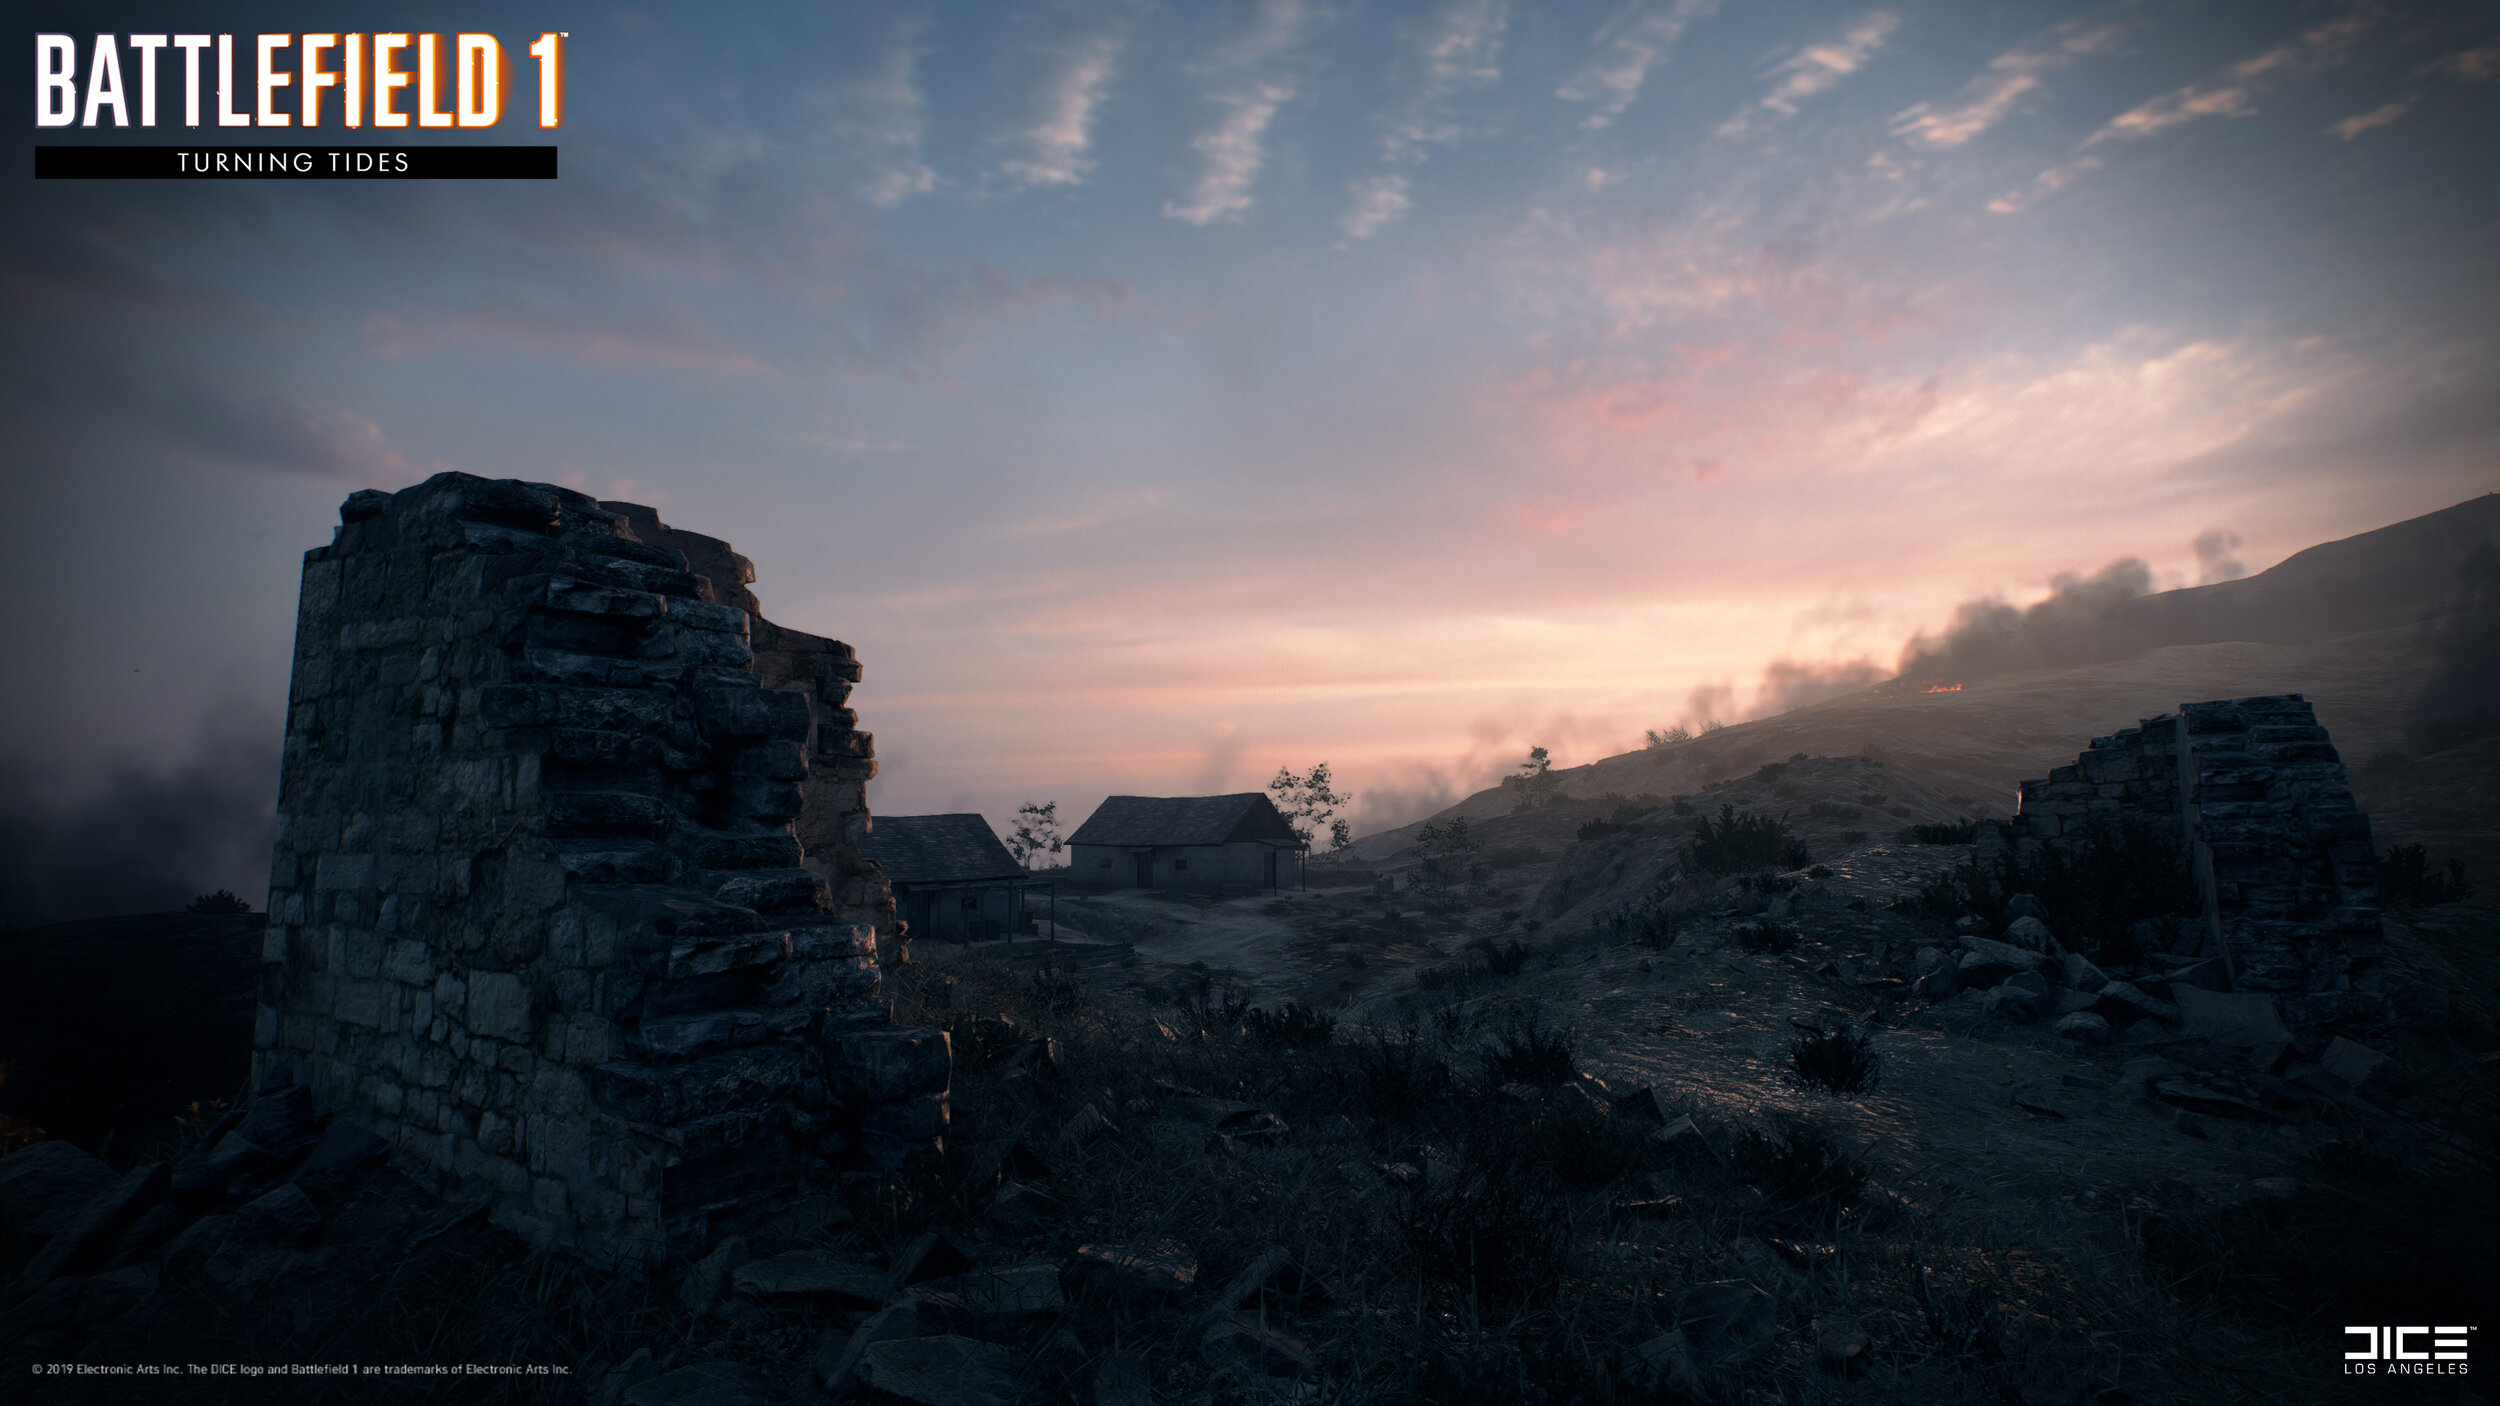 UPDATE 1820: Cliffside REIMAGINED, map, gameplay, shield changes, & more! ·  Intruder update for 20 March 2021 · SteamDB